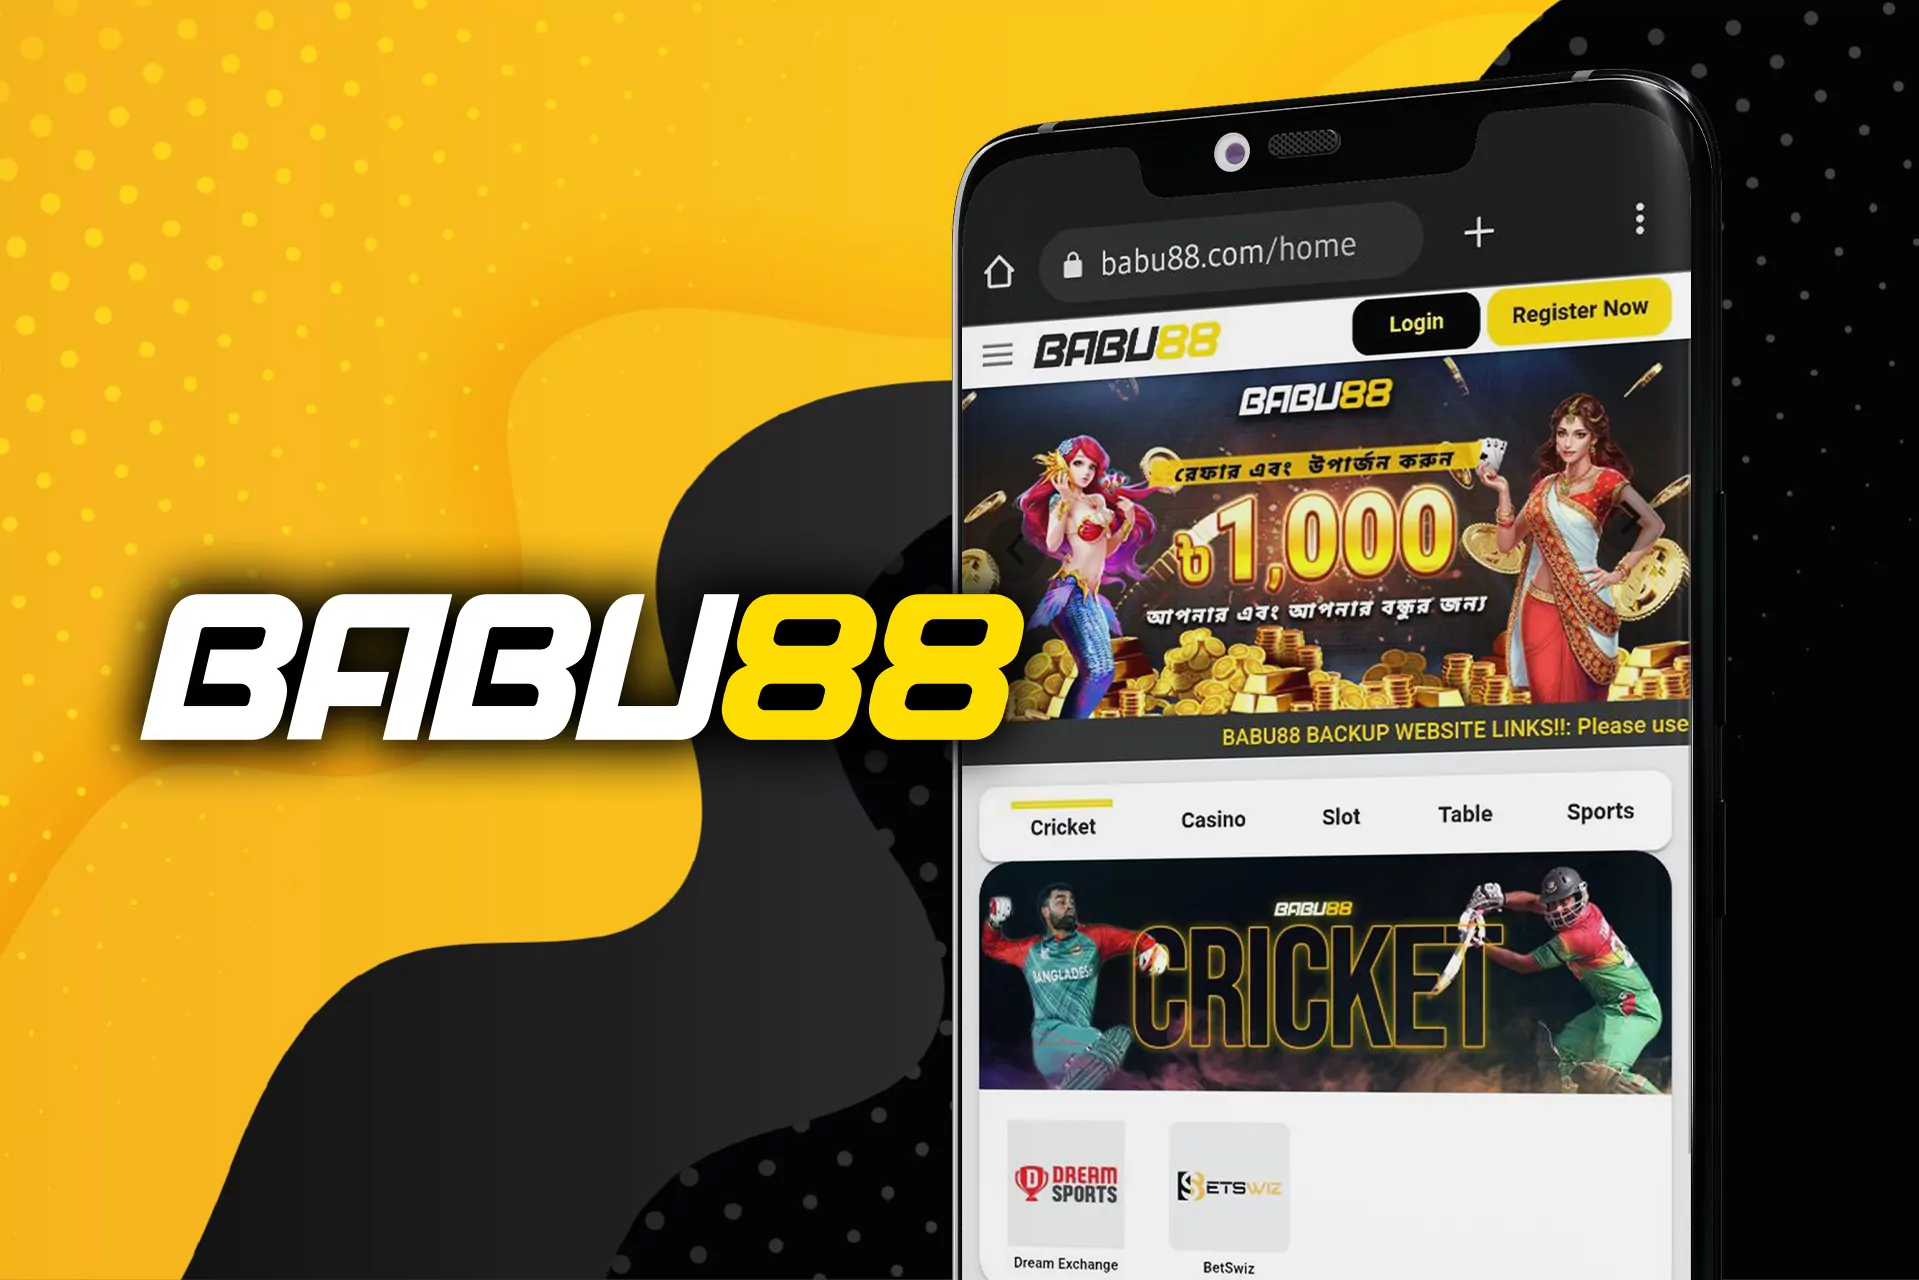 Use Babu88 mobile website version if you don't want to download the app.